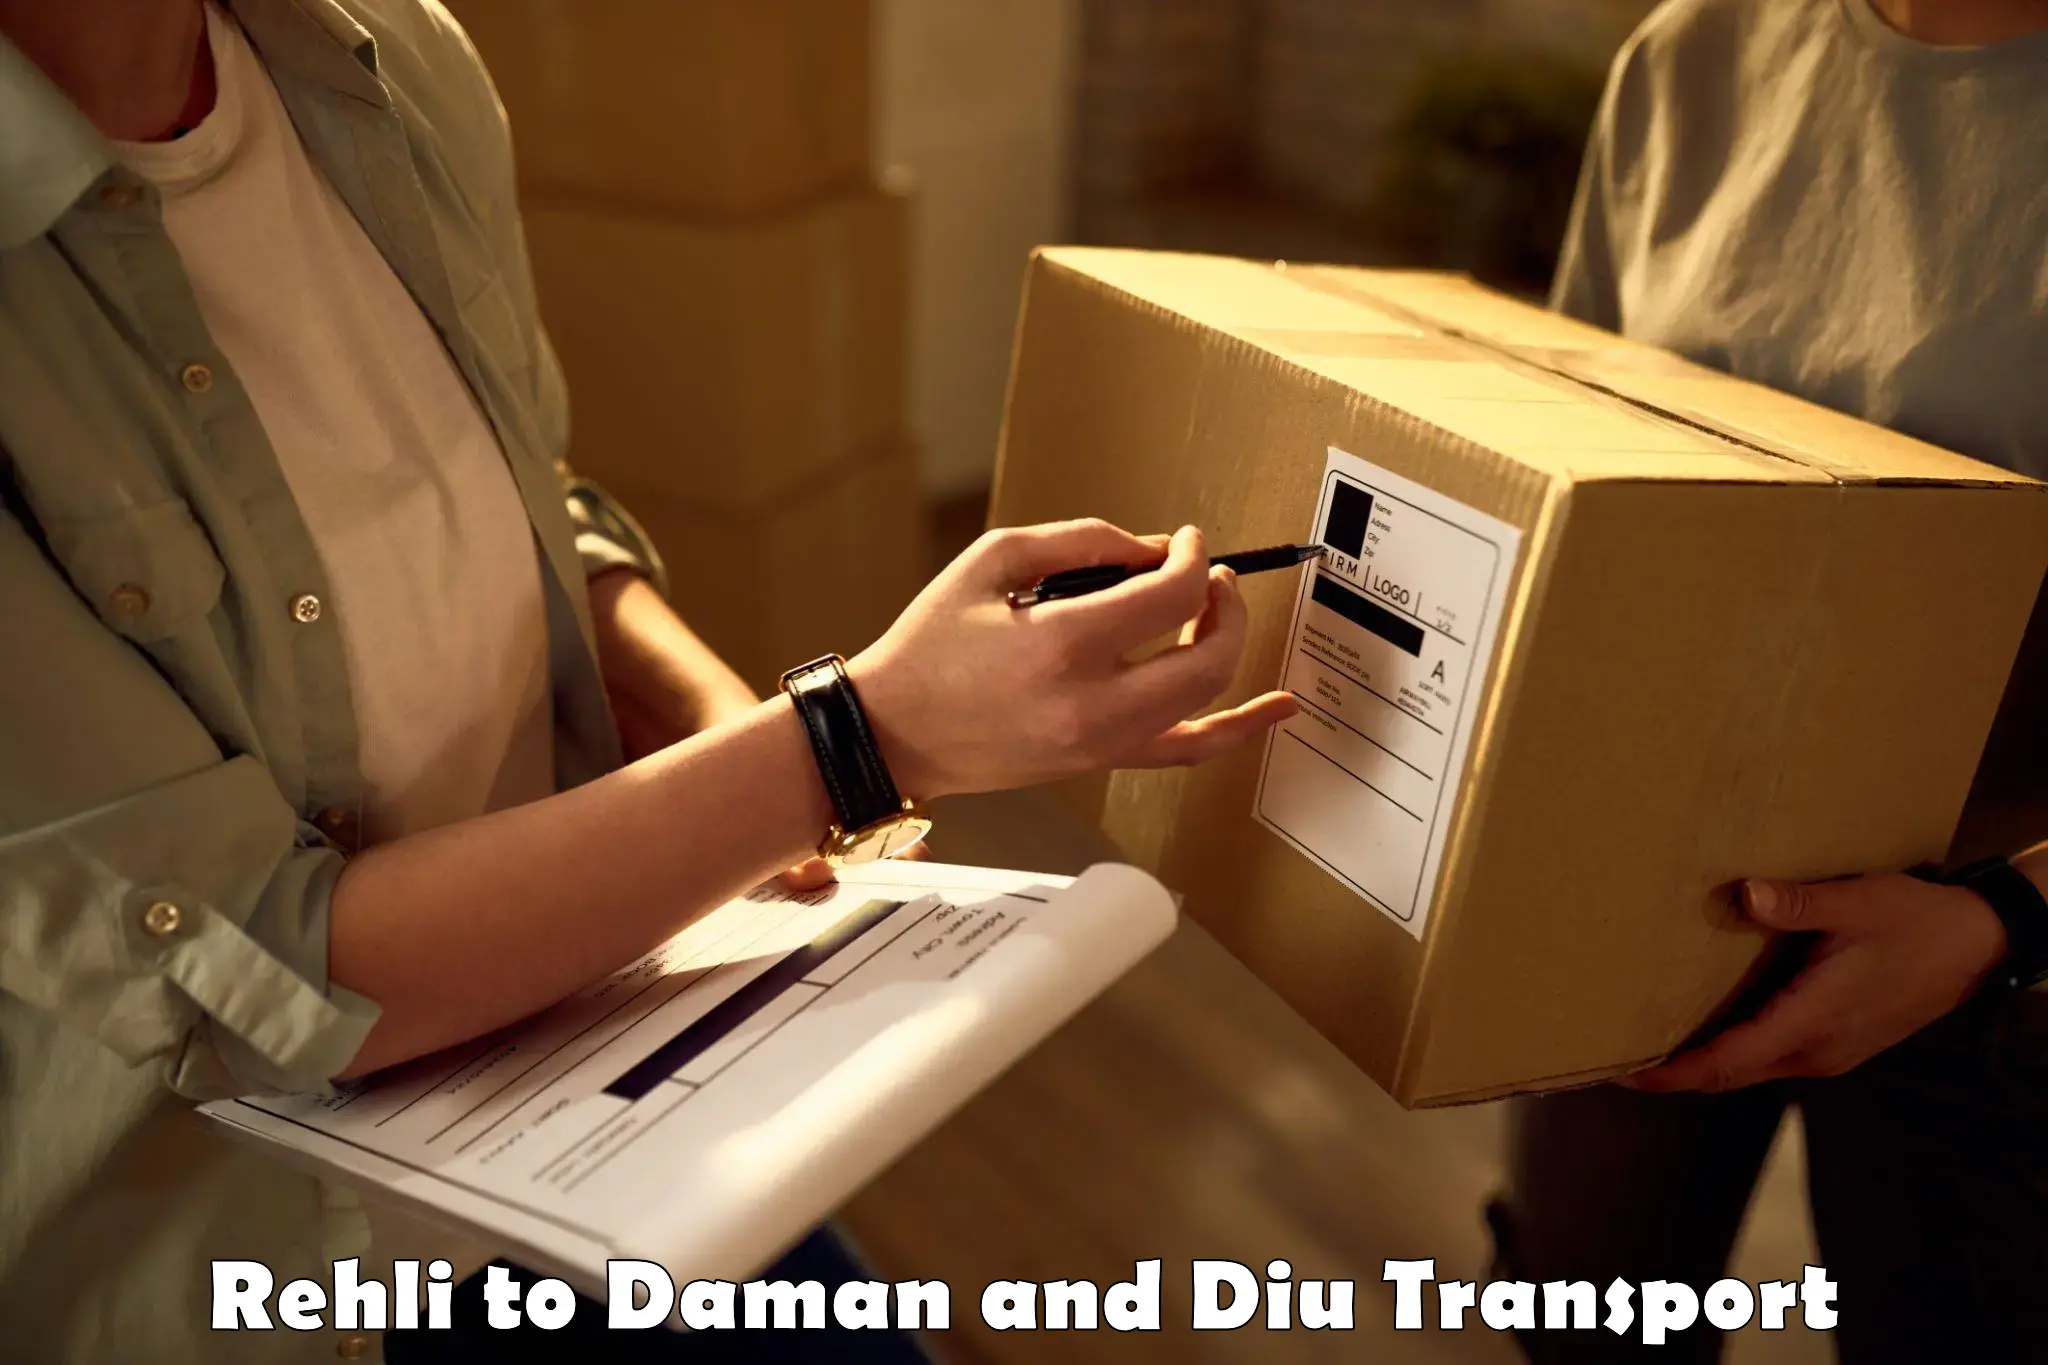 Package delivery services Rehli to Diu